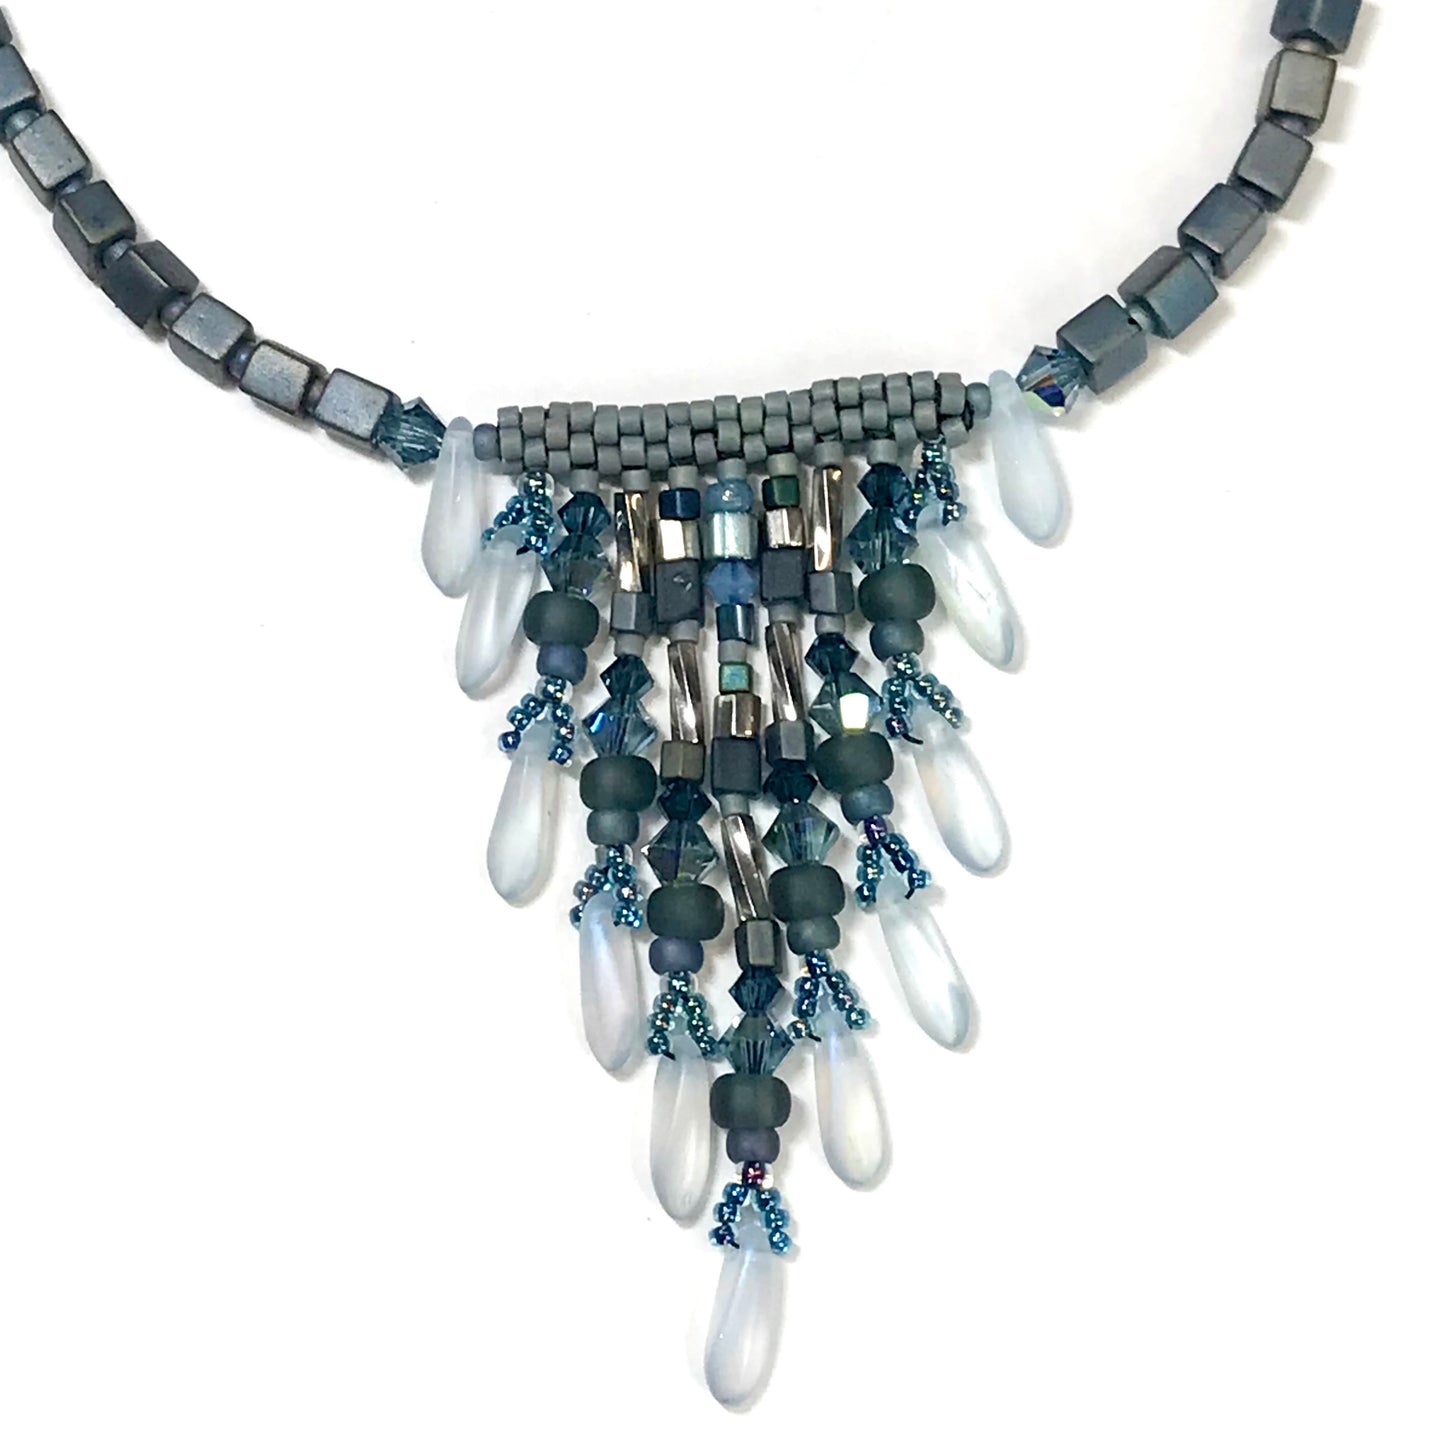 Blue Gray Silver Fringy Necklace - 9 strands